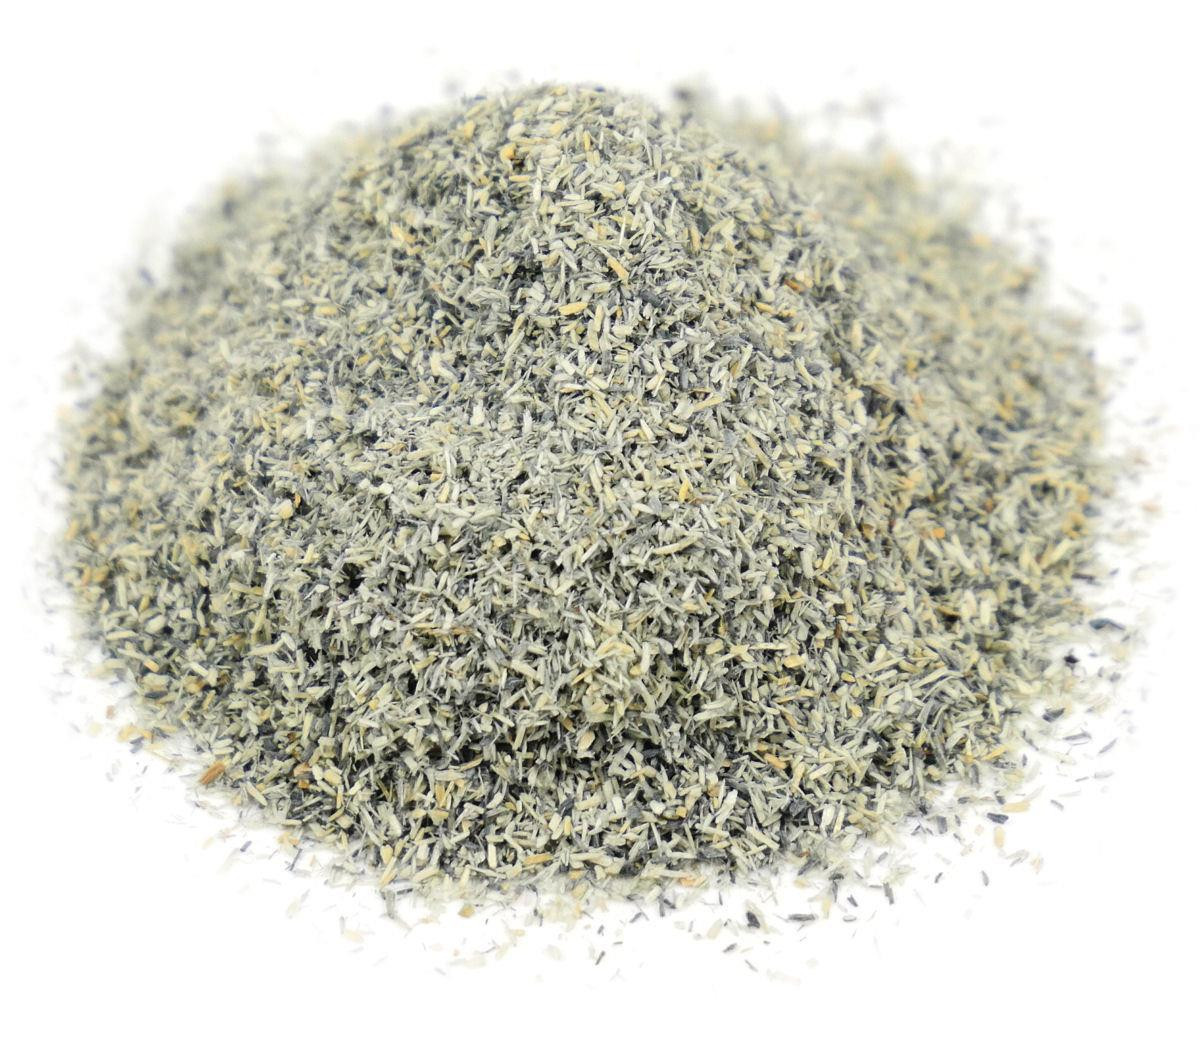 Grey Scatter Material 50g (GM116)